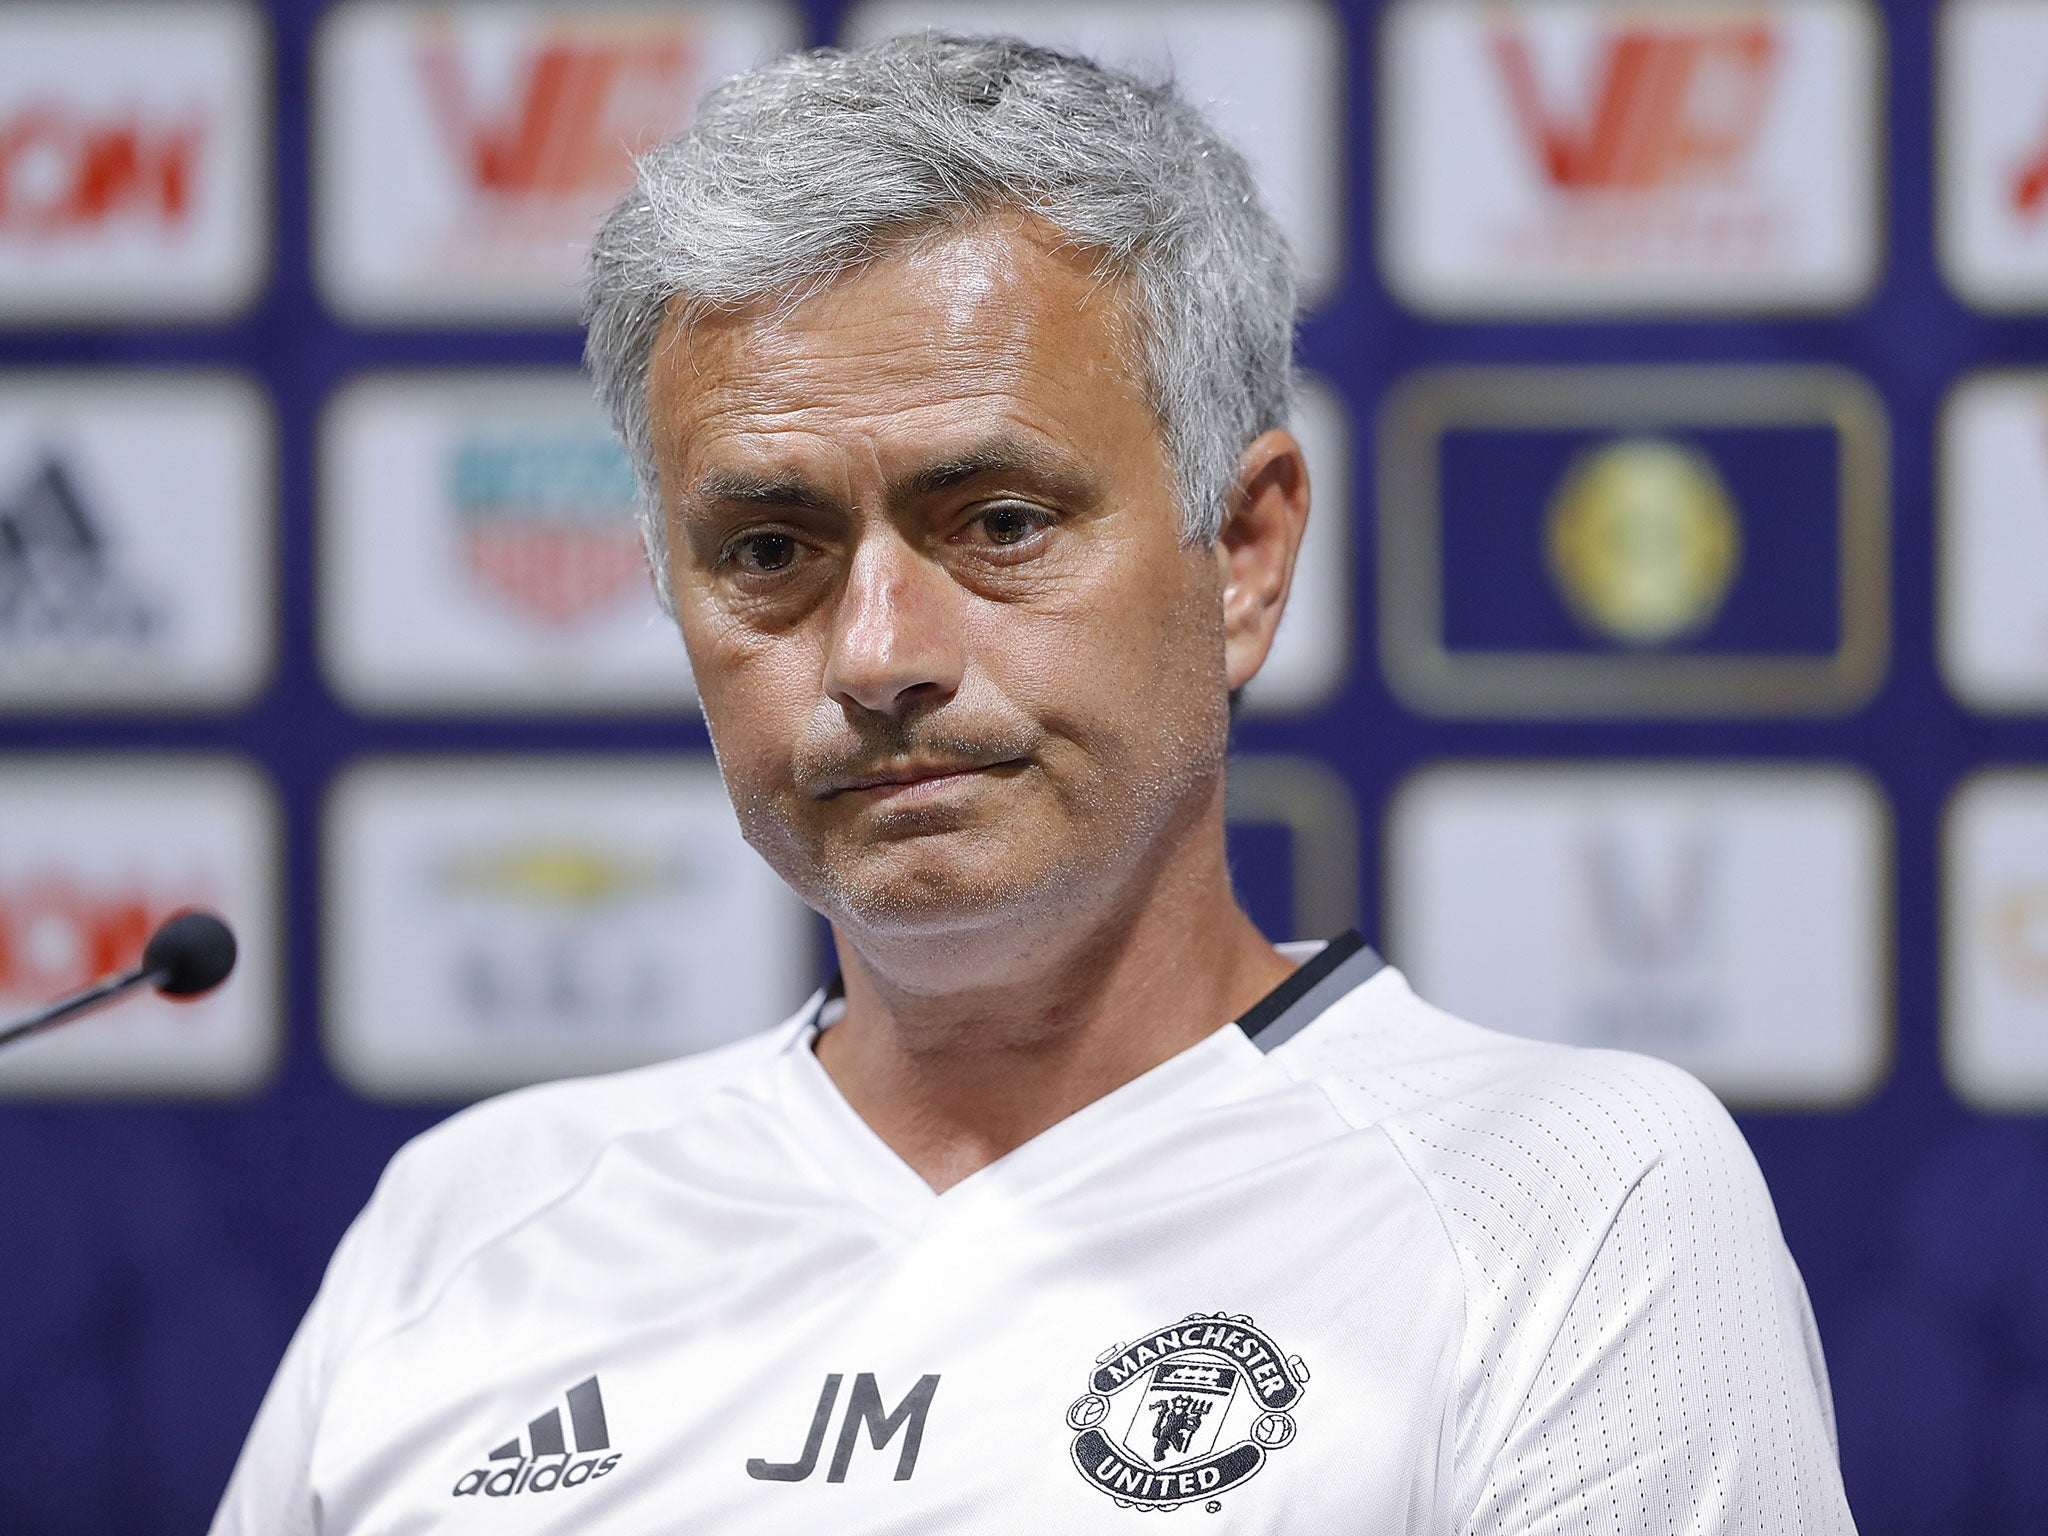 Mourinho answers questions during a press conference in China